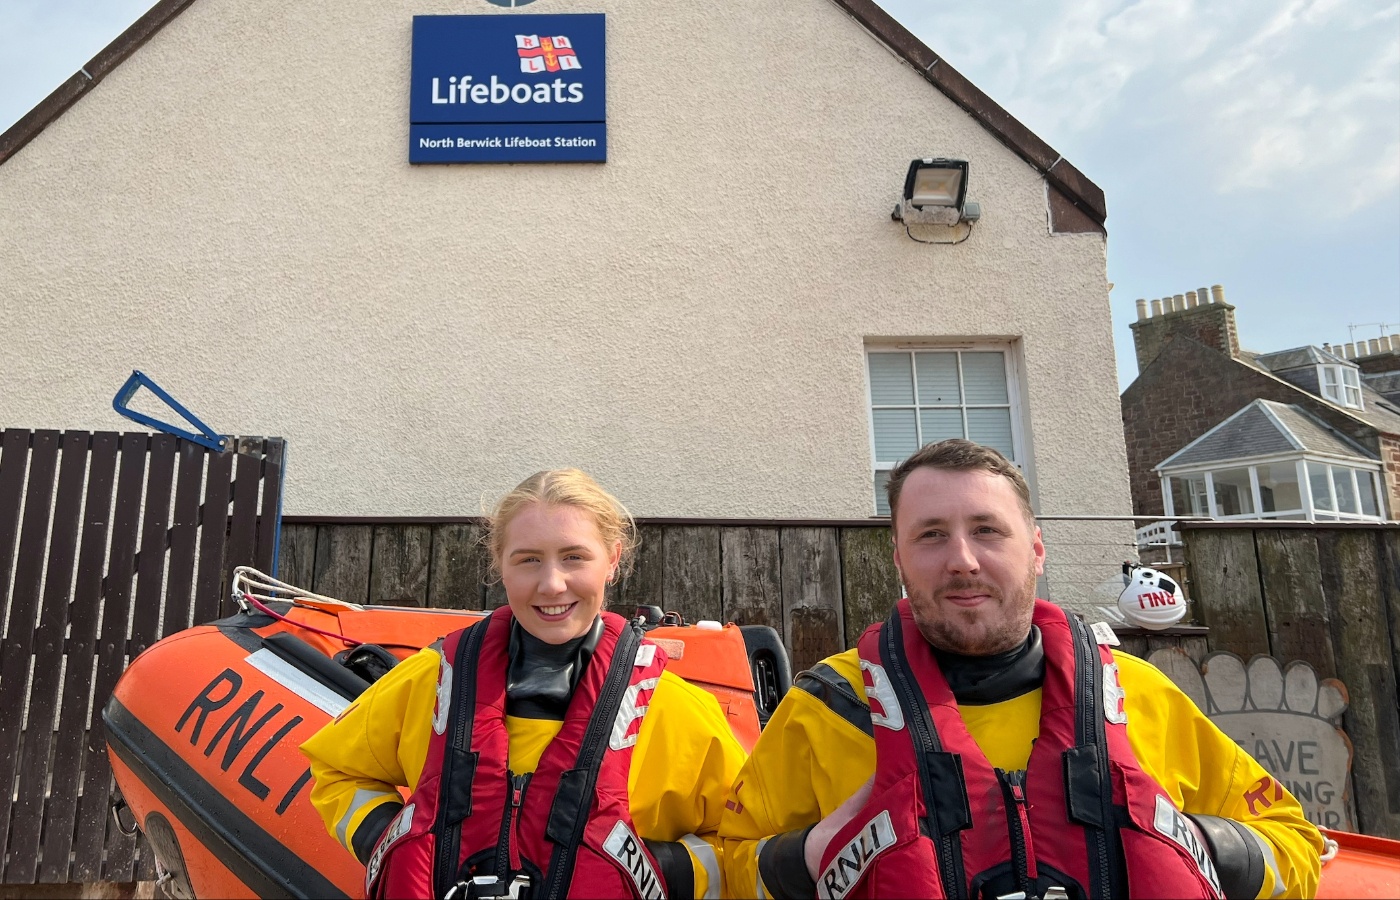 Sunday 12 May saw the Selby siblings side by side on a call out for the first time as the RNLI’s volunteers were launched to people in the water at Gullane bay.